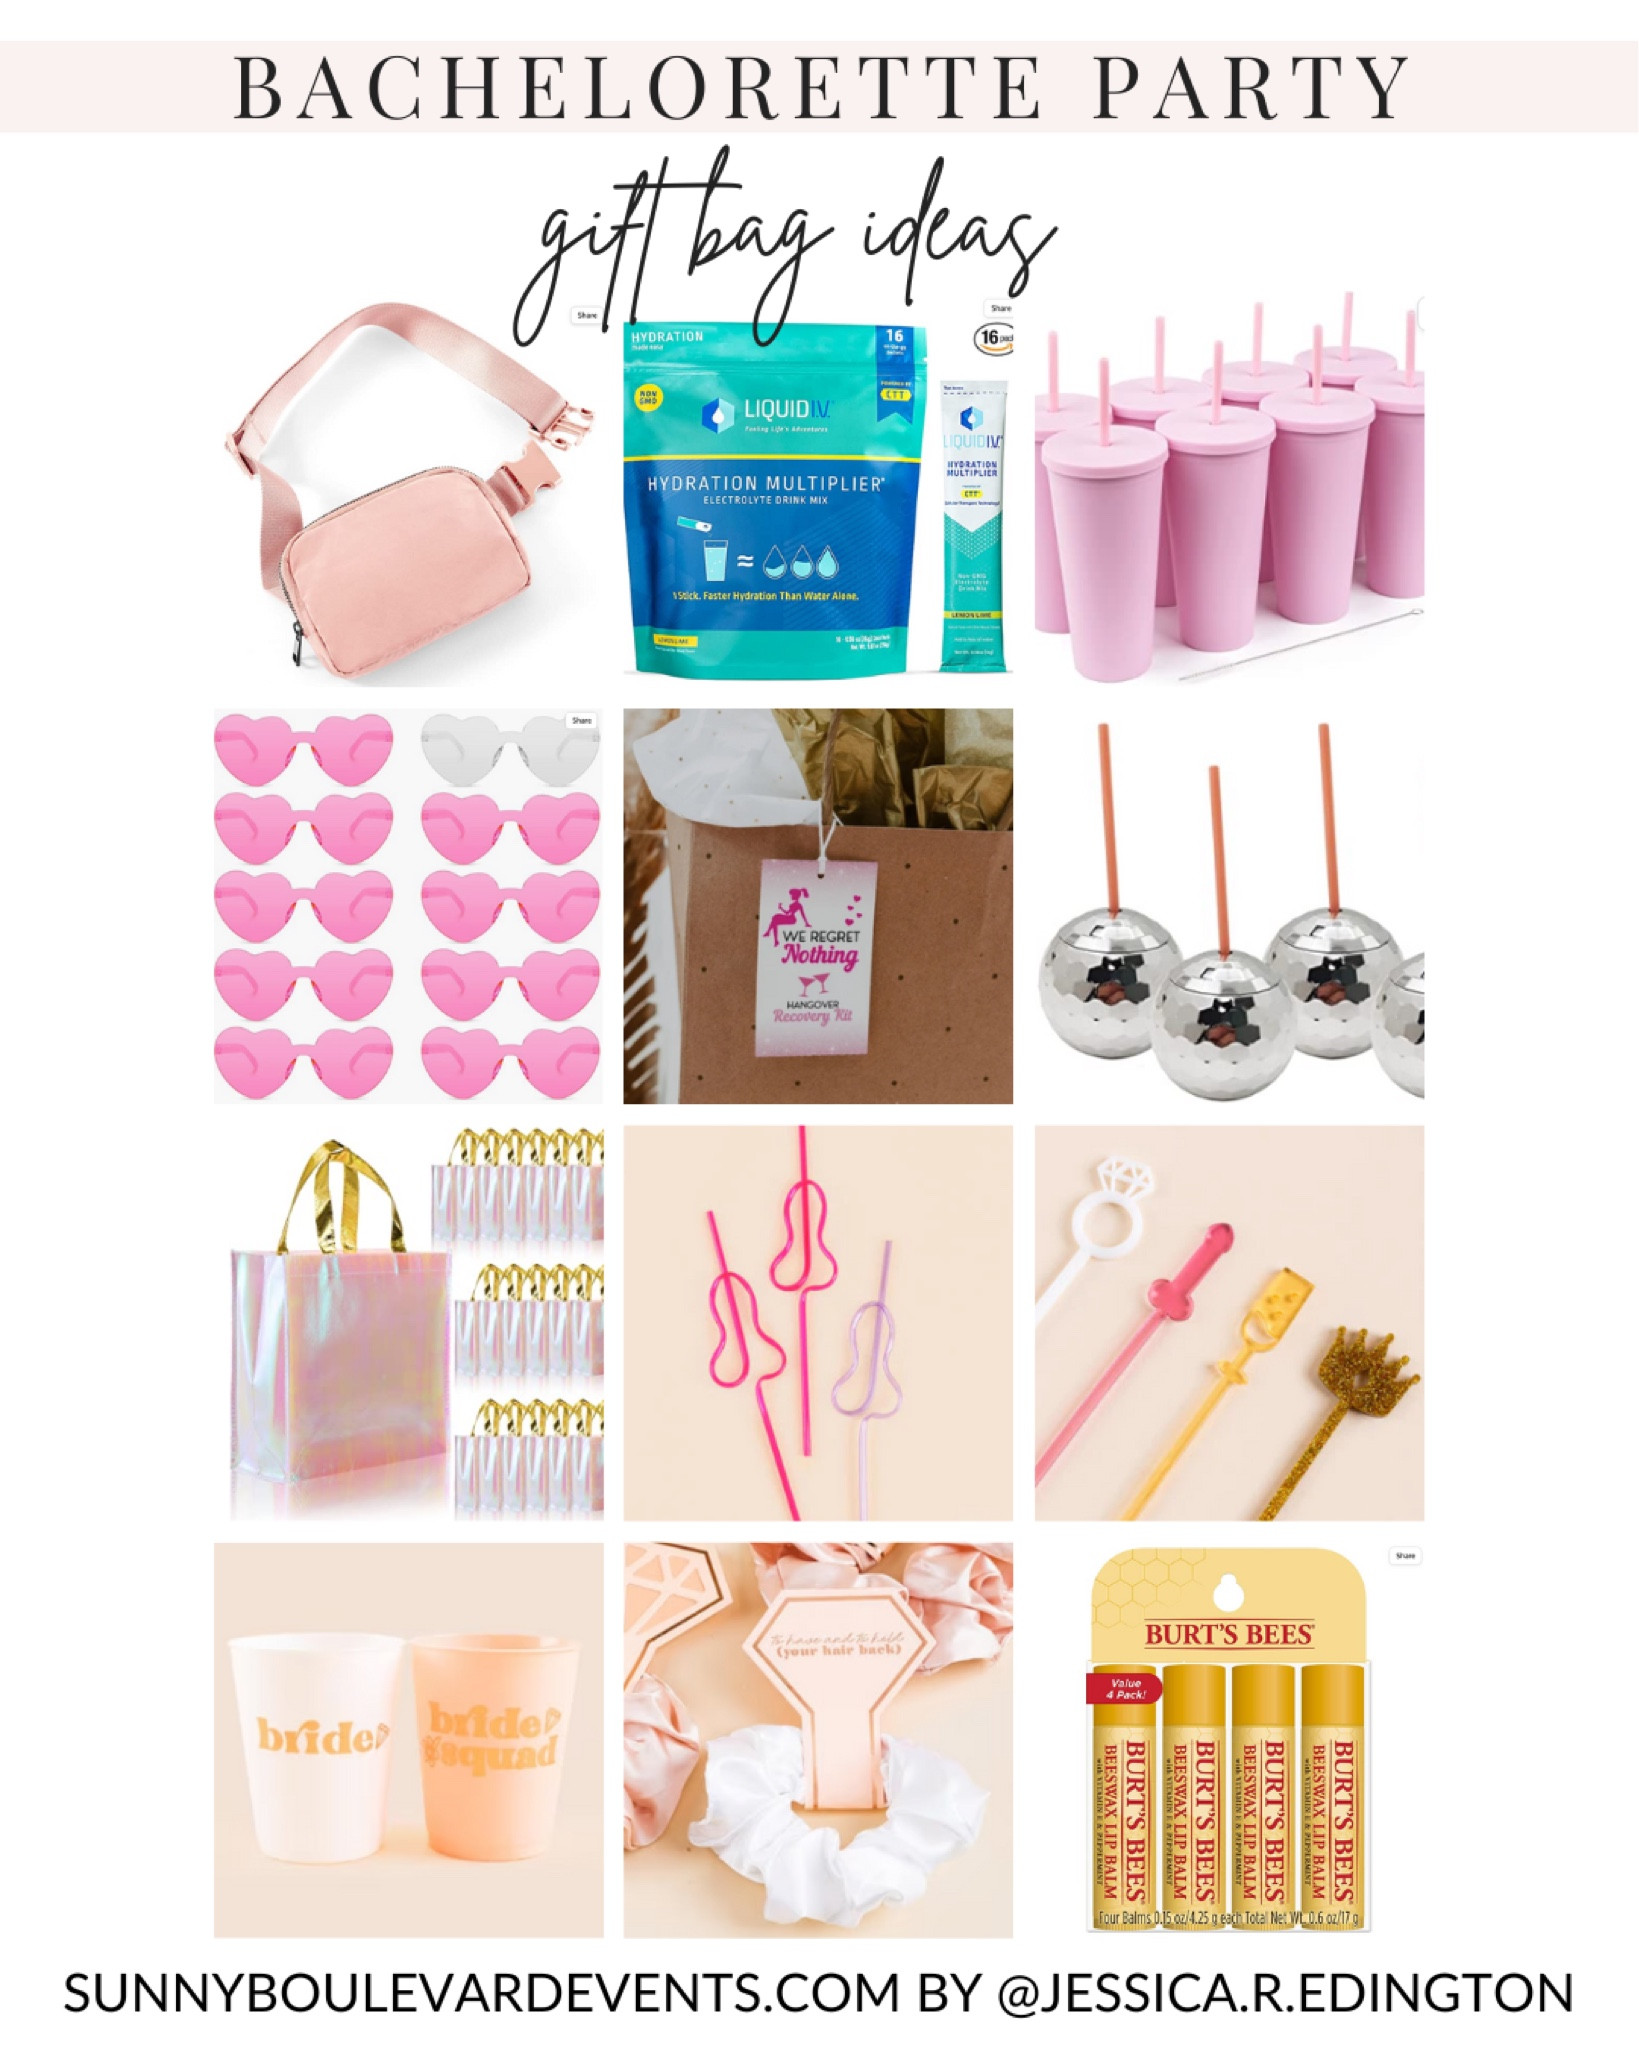 The 35 Best Bachelorette Party Favors For Guest Goodie Bags, 44% OFF